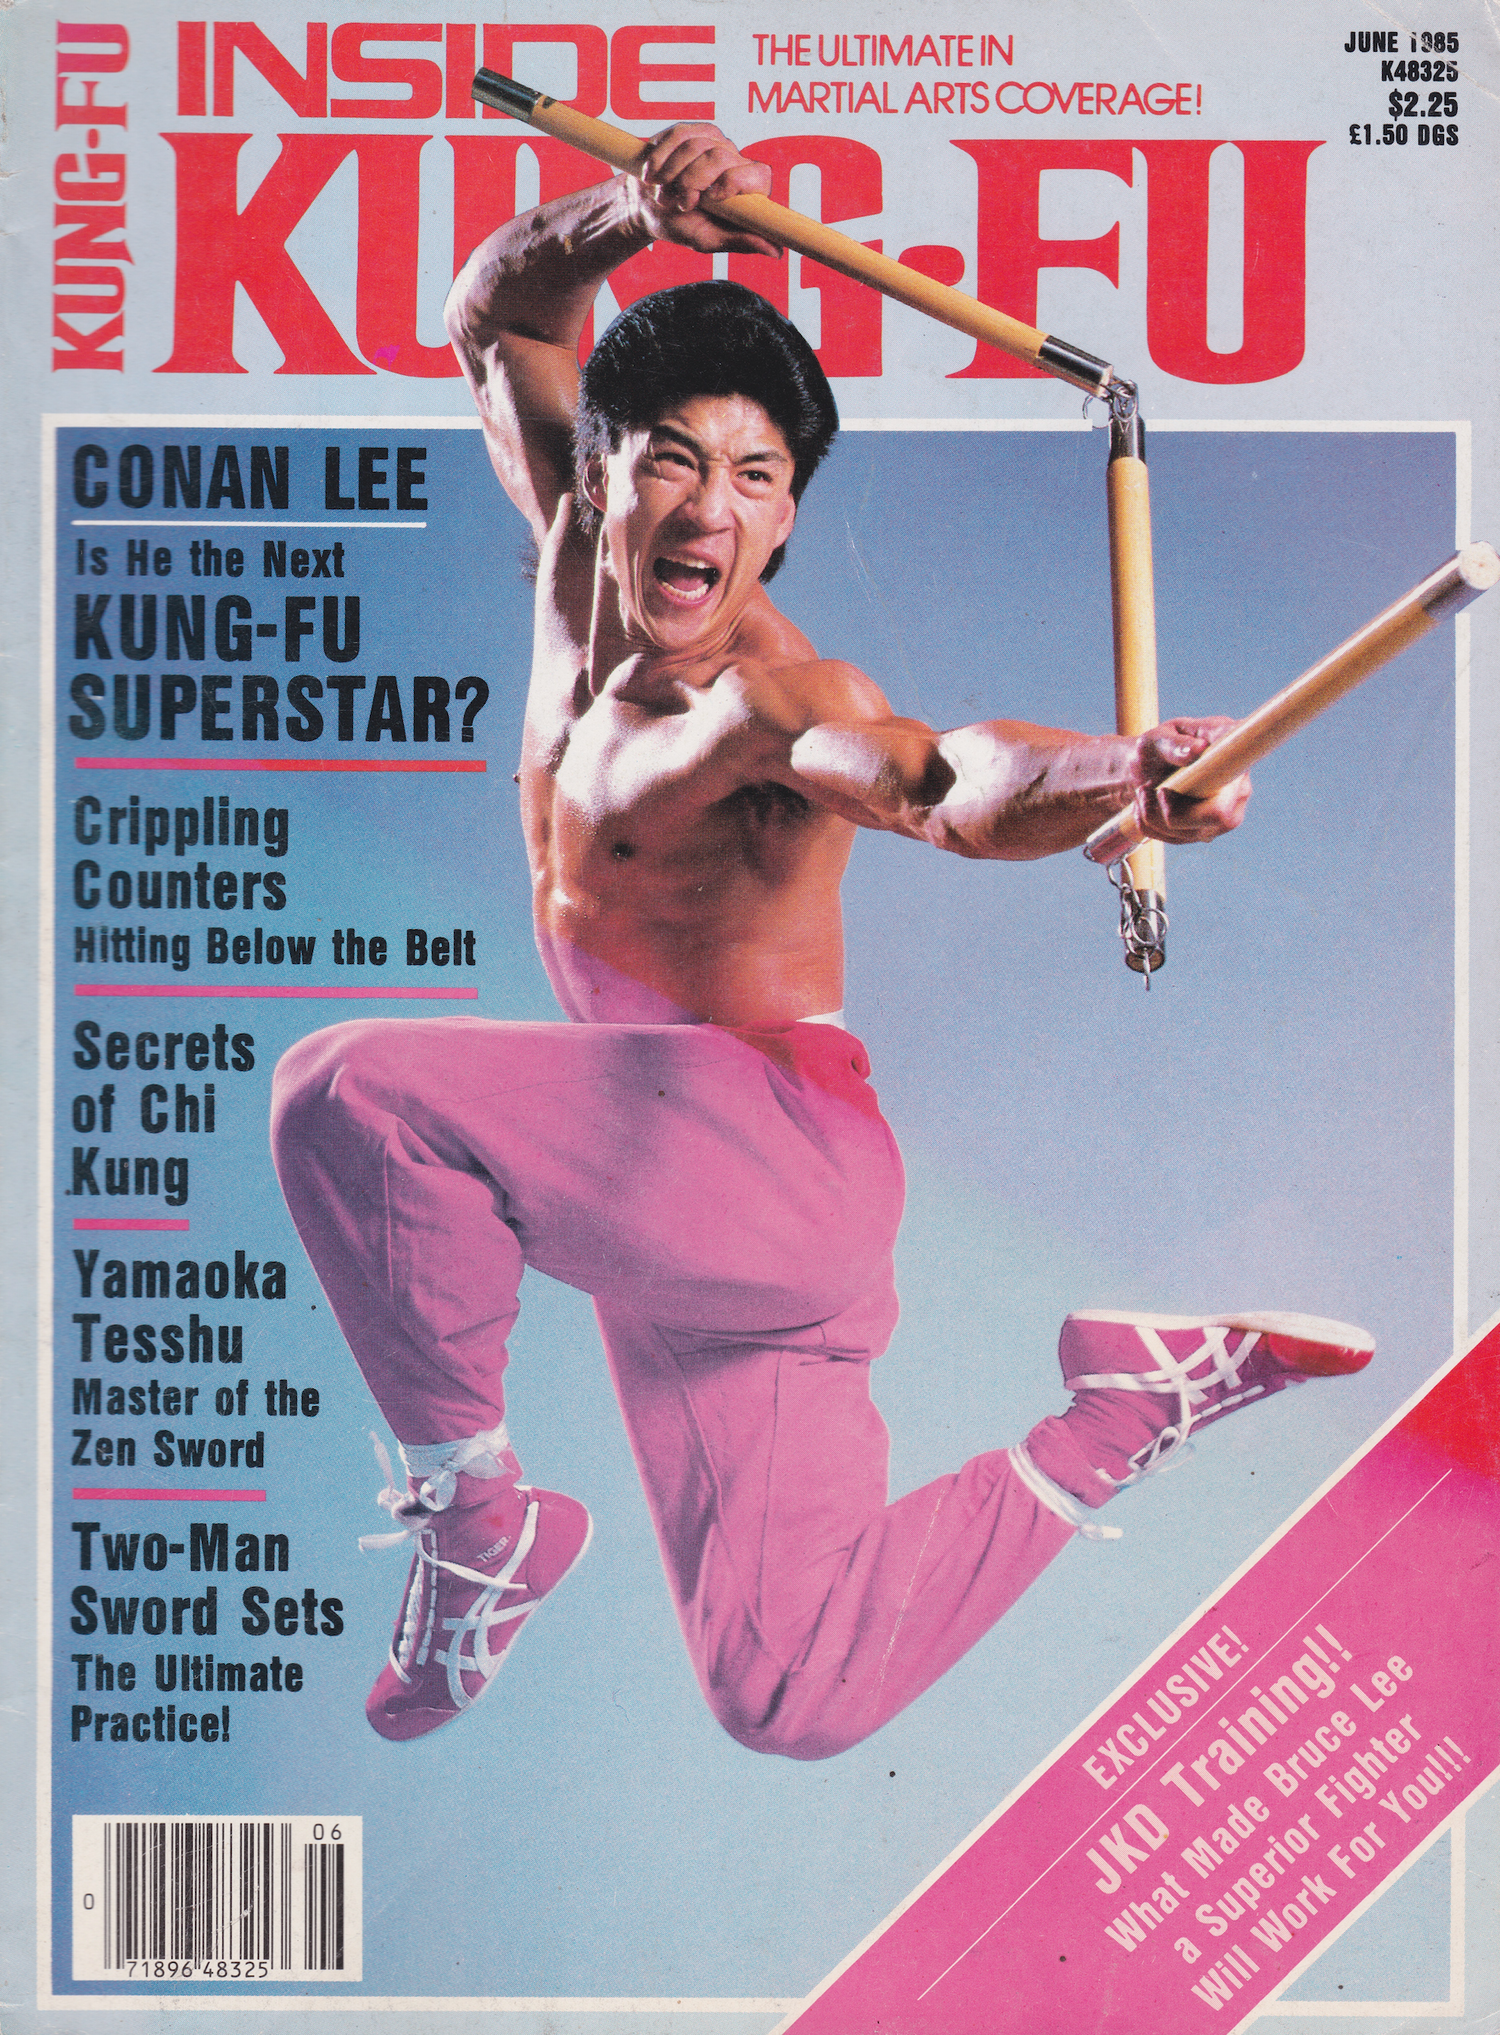 Inside Kung Fu June 1985 Magazine (Preowned)